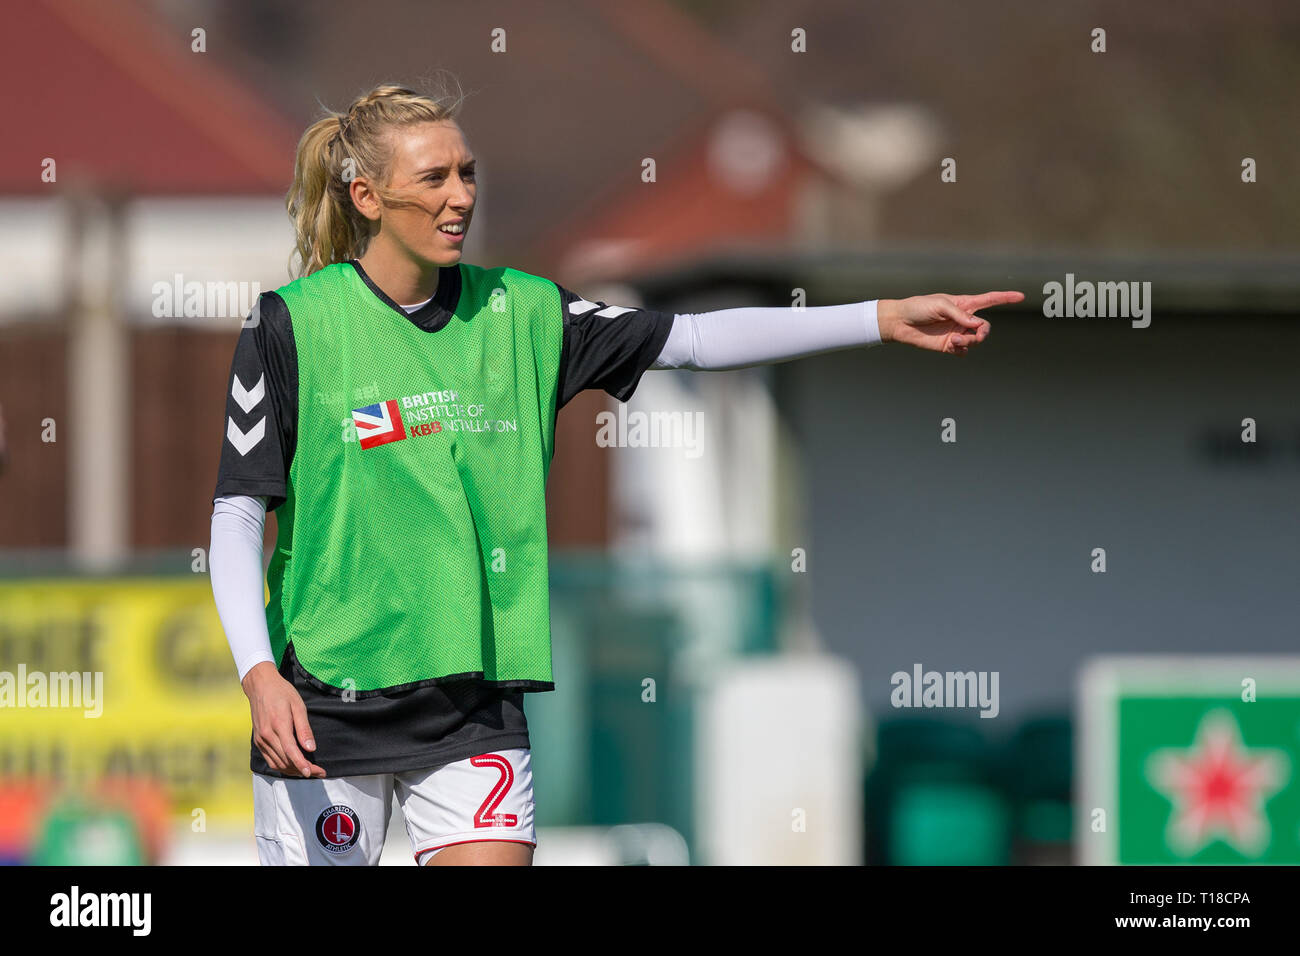 Dartford, Kent, UK. 24th March, 2019. Charlotte Kerr of Charlton Athletic during the FAWSL 2 match between Charlton Athletic Women and Manchester United Women at Oakwood, Old Rd, Crayford, Dartford, Kent, DA1 4DN on 24 March 2019. Photo by Andy Rowland. Credit: Andrew Rowland/Alamy Live News Stock Photo